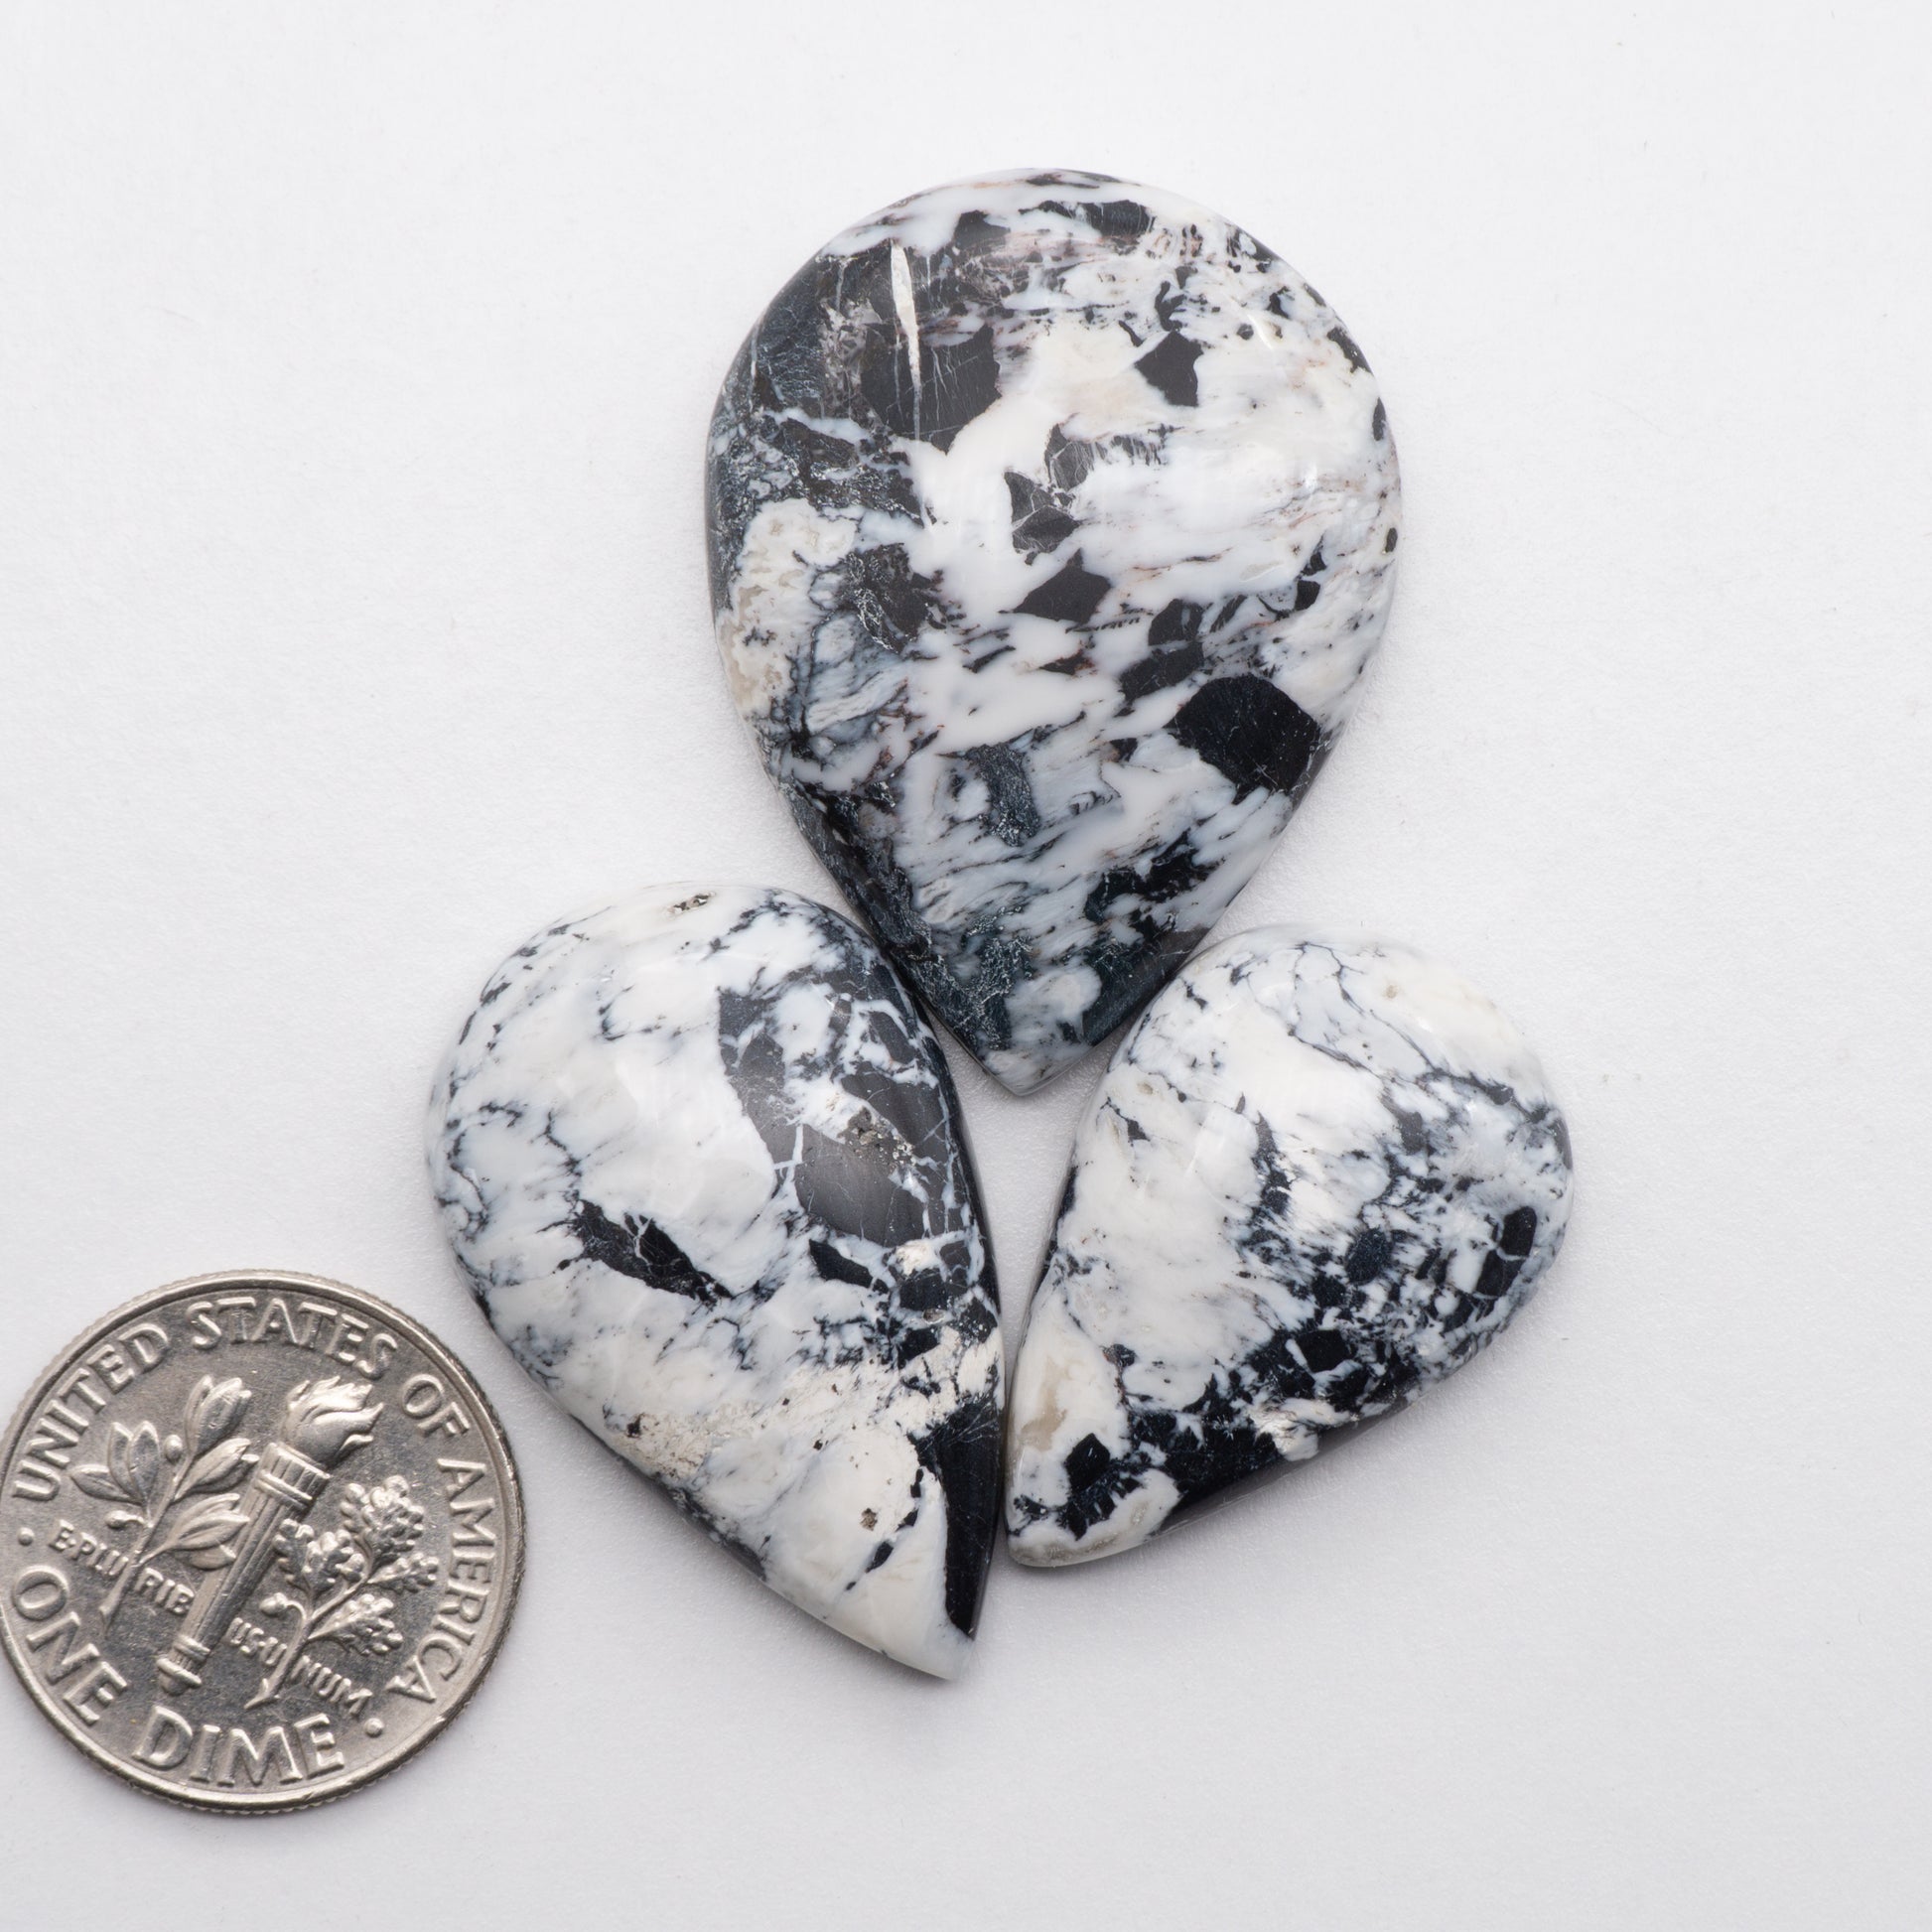 This Natural White Buffalo Cabochon has a glossy finish and is backed for added strength. Mined in Nevada, USA this stone is similar to turquoise, used for jewelry making.